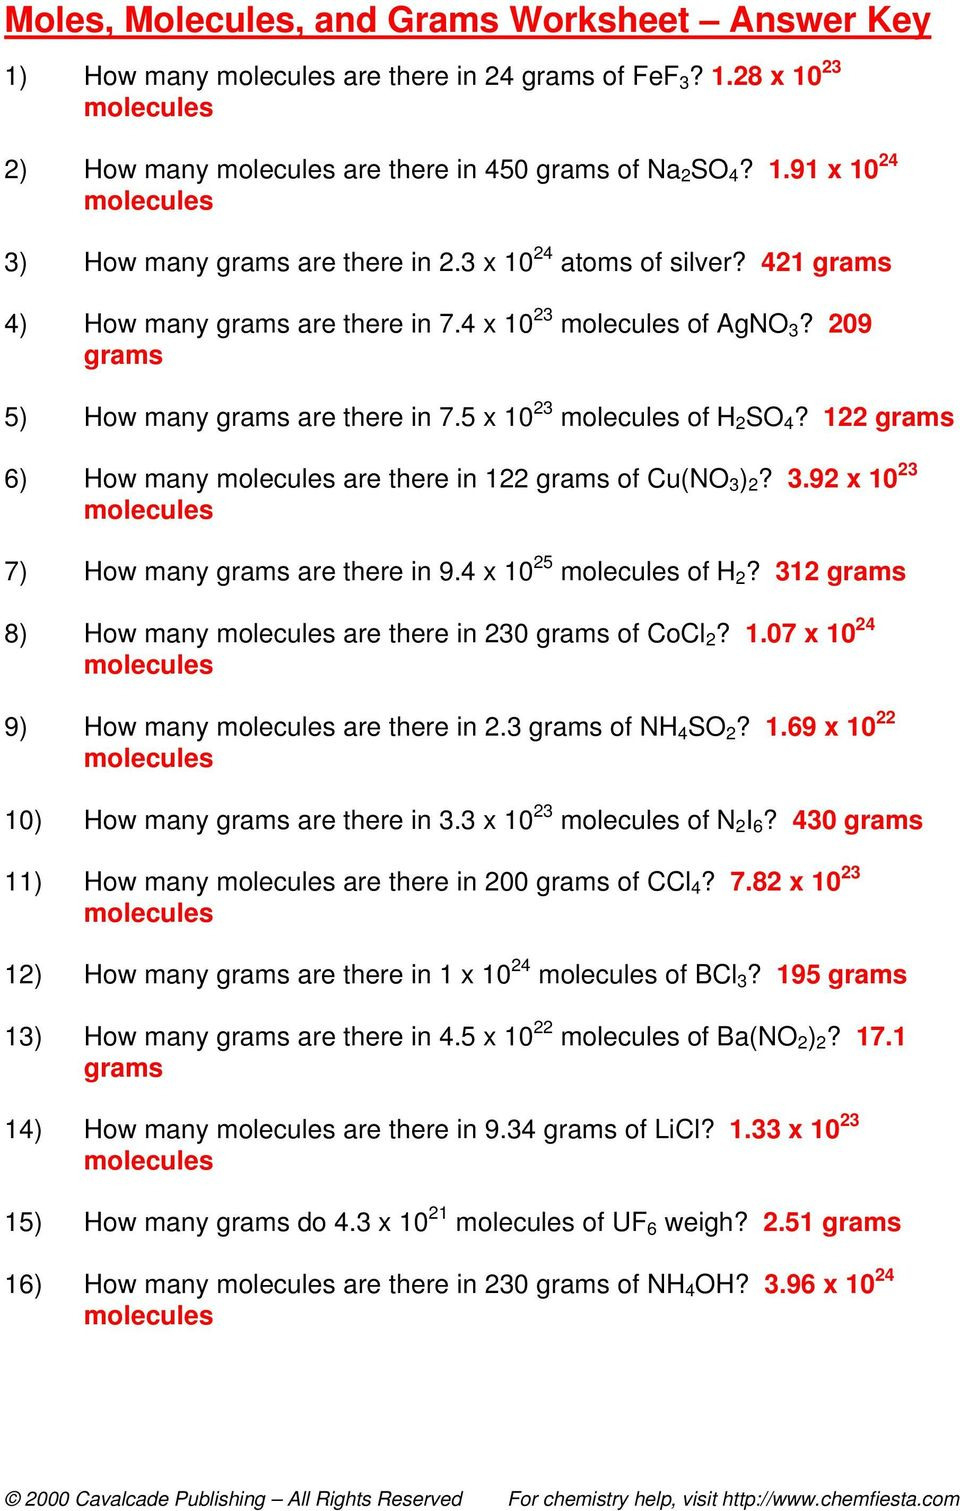 Moles Molecules And Mass Worksheet Answers